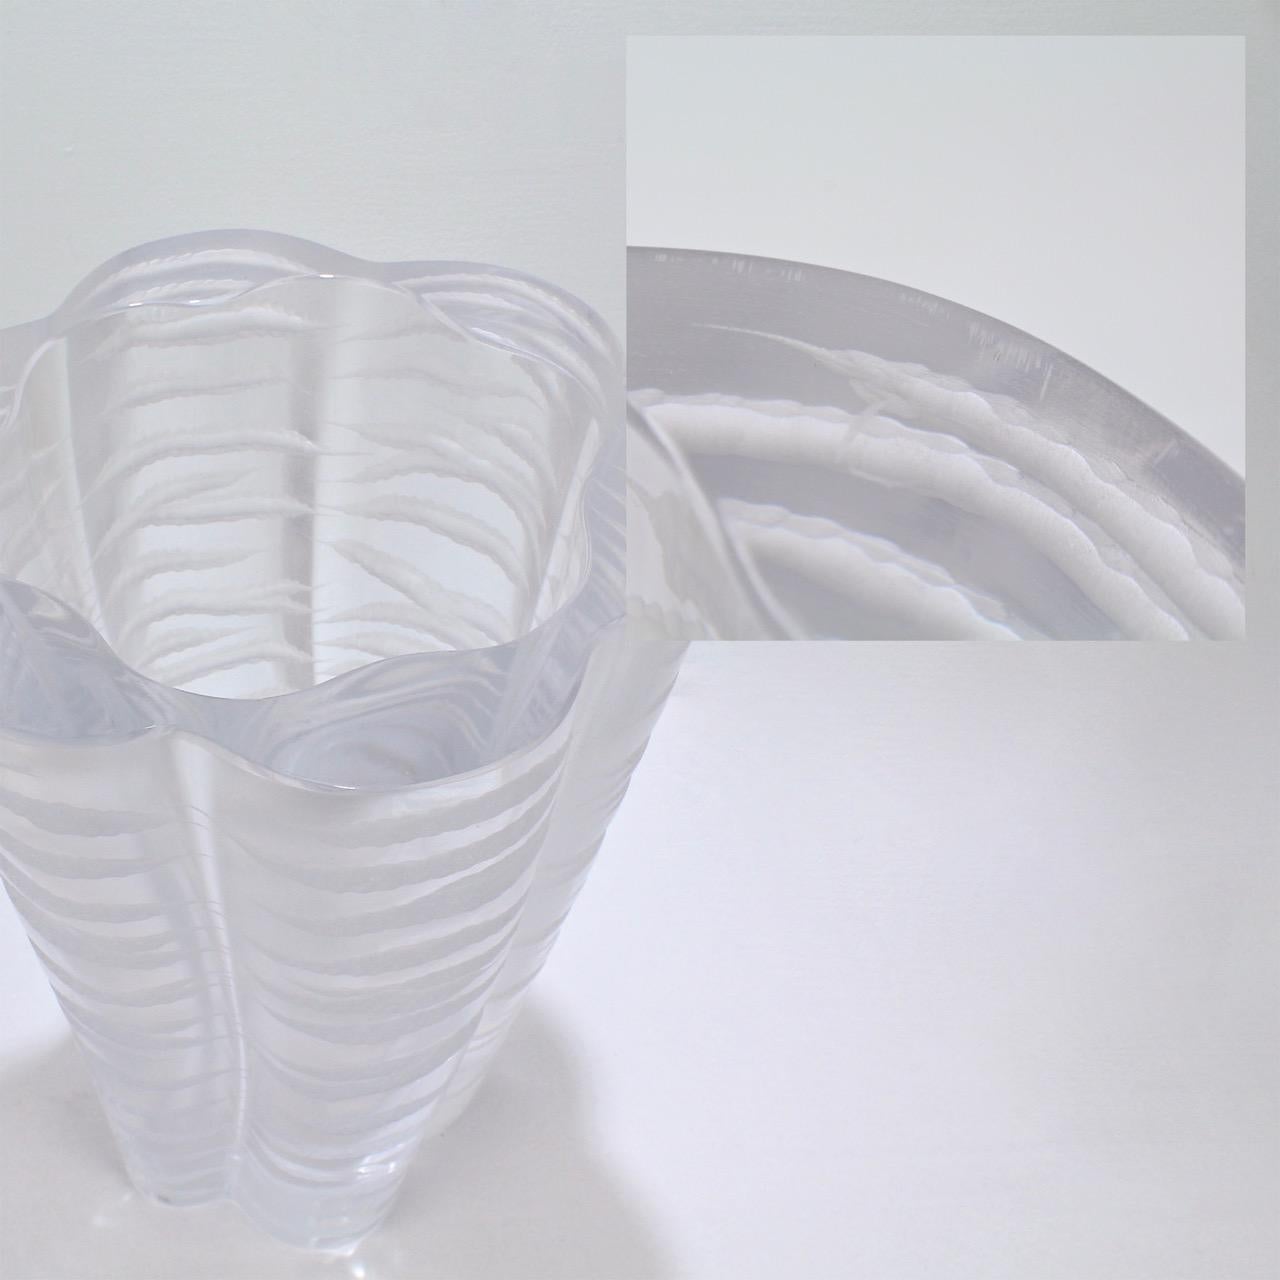 Senlis, a Mid-Century Modern French Art Glass Vase by Marc Lalique for Lalique 8